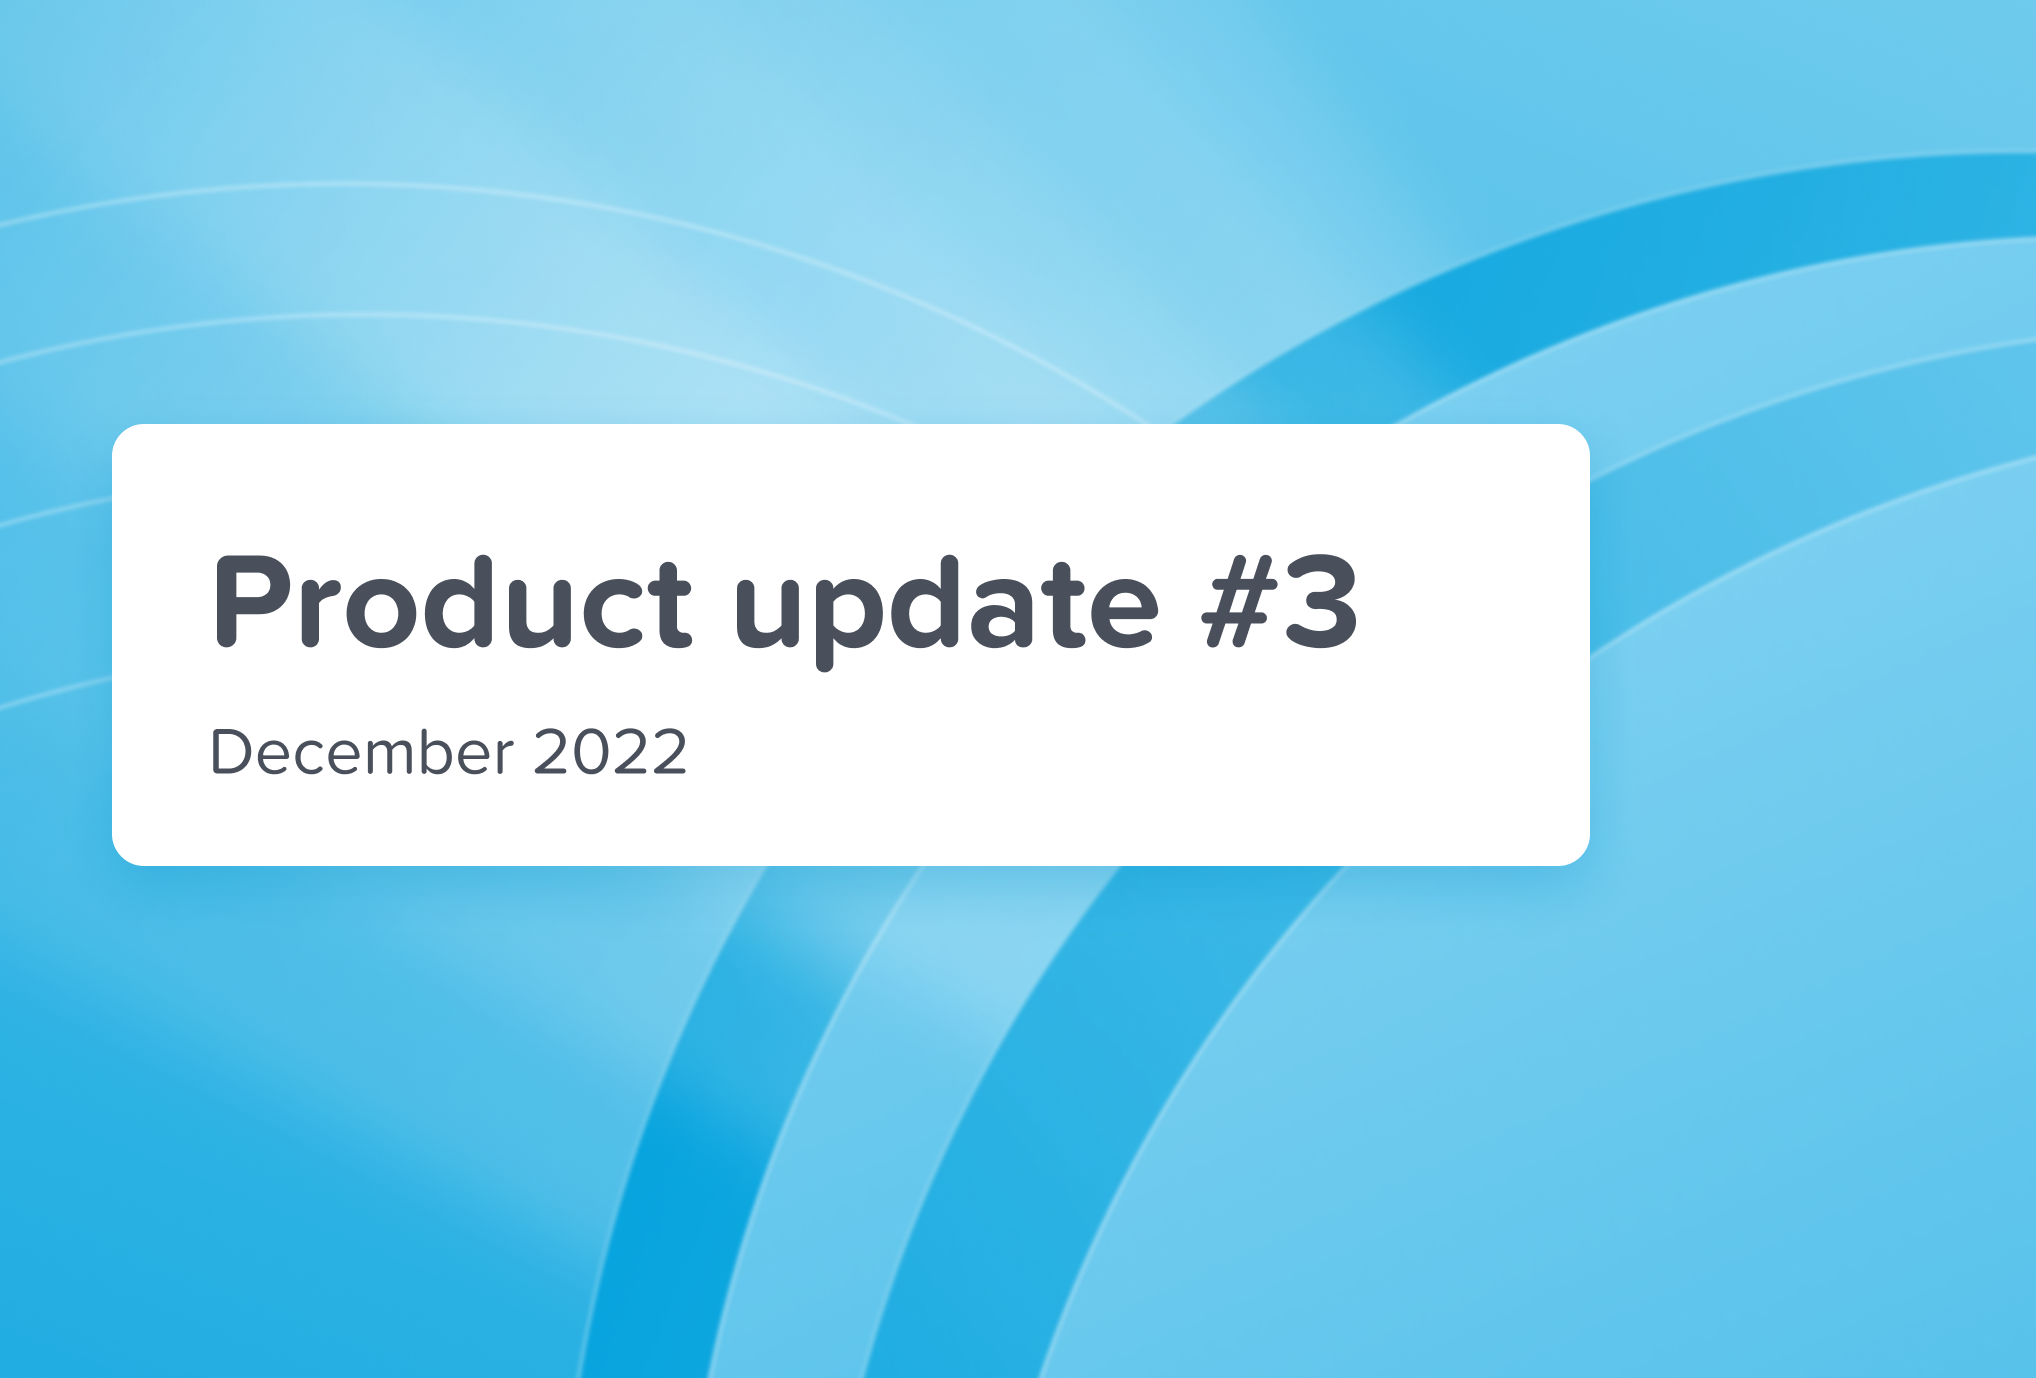 Product update #3